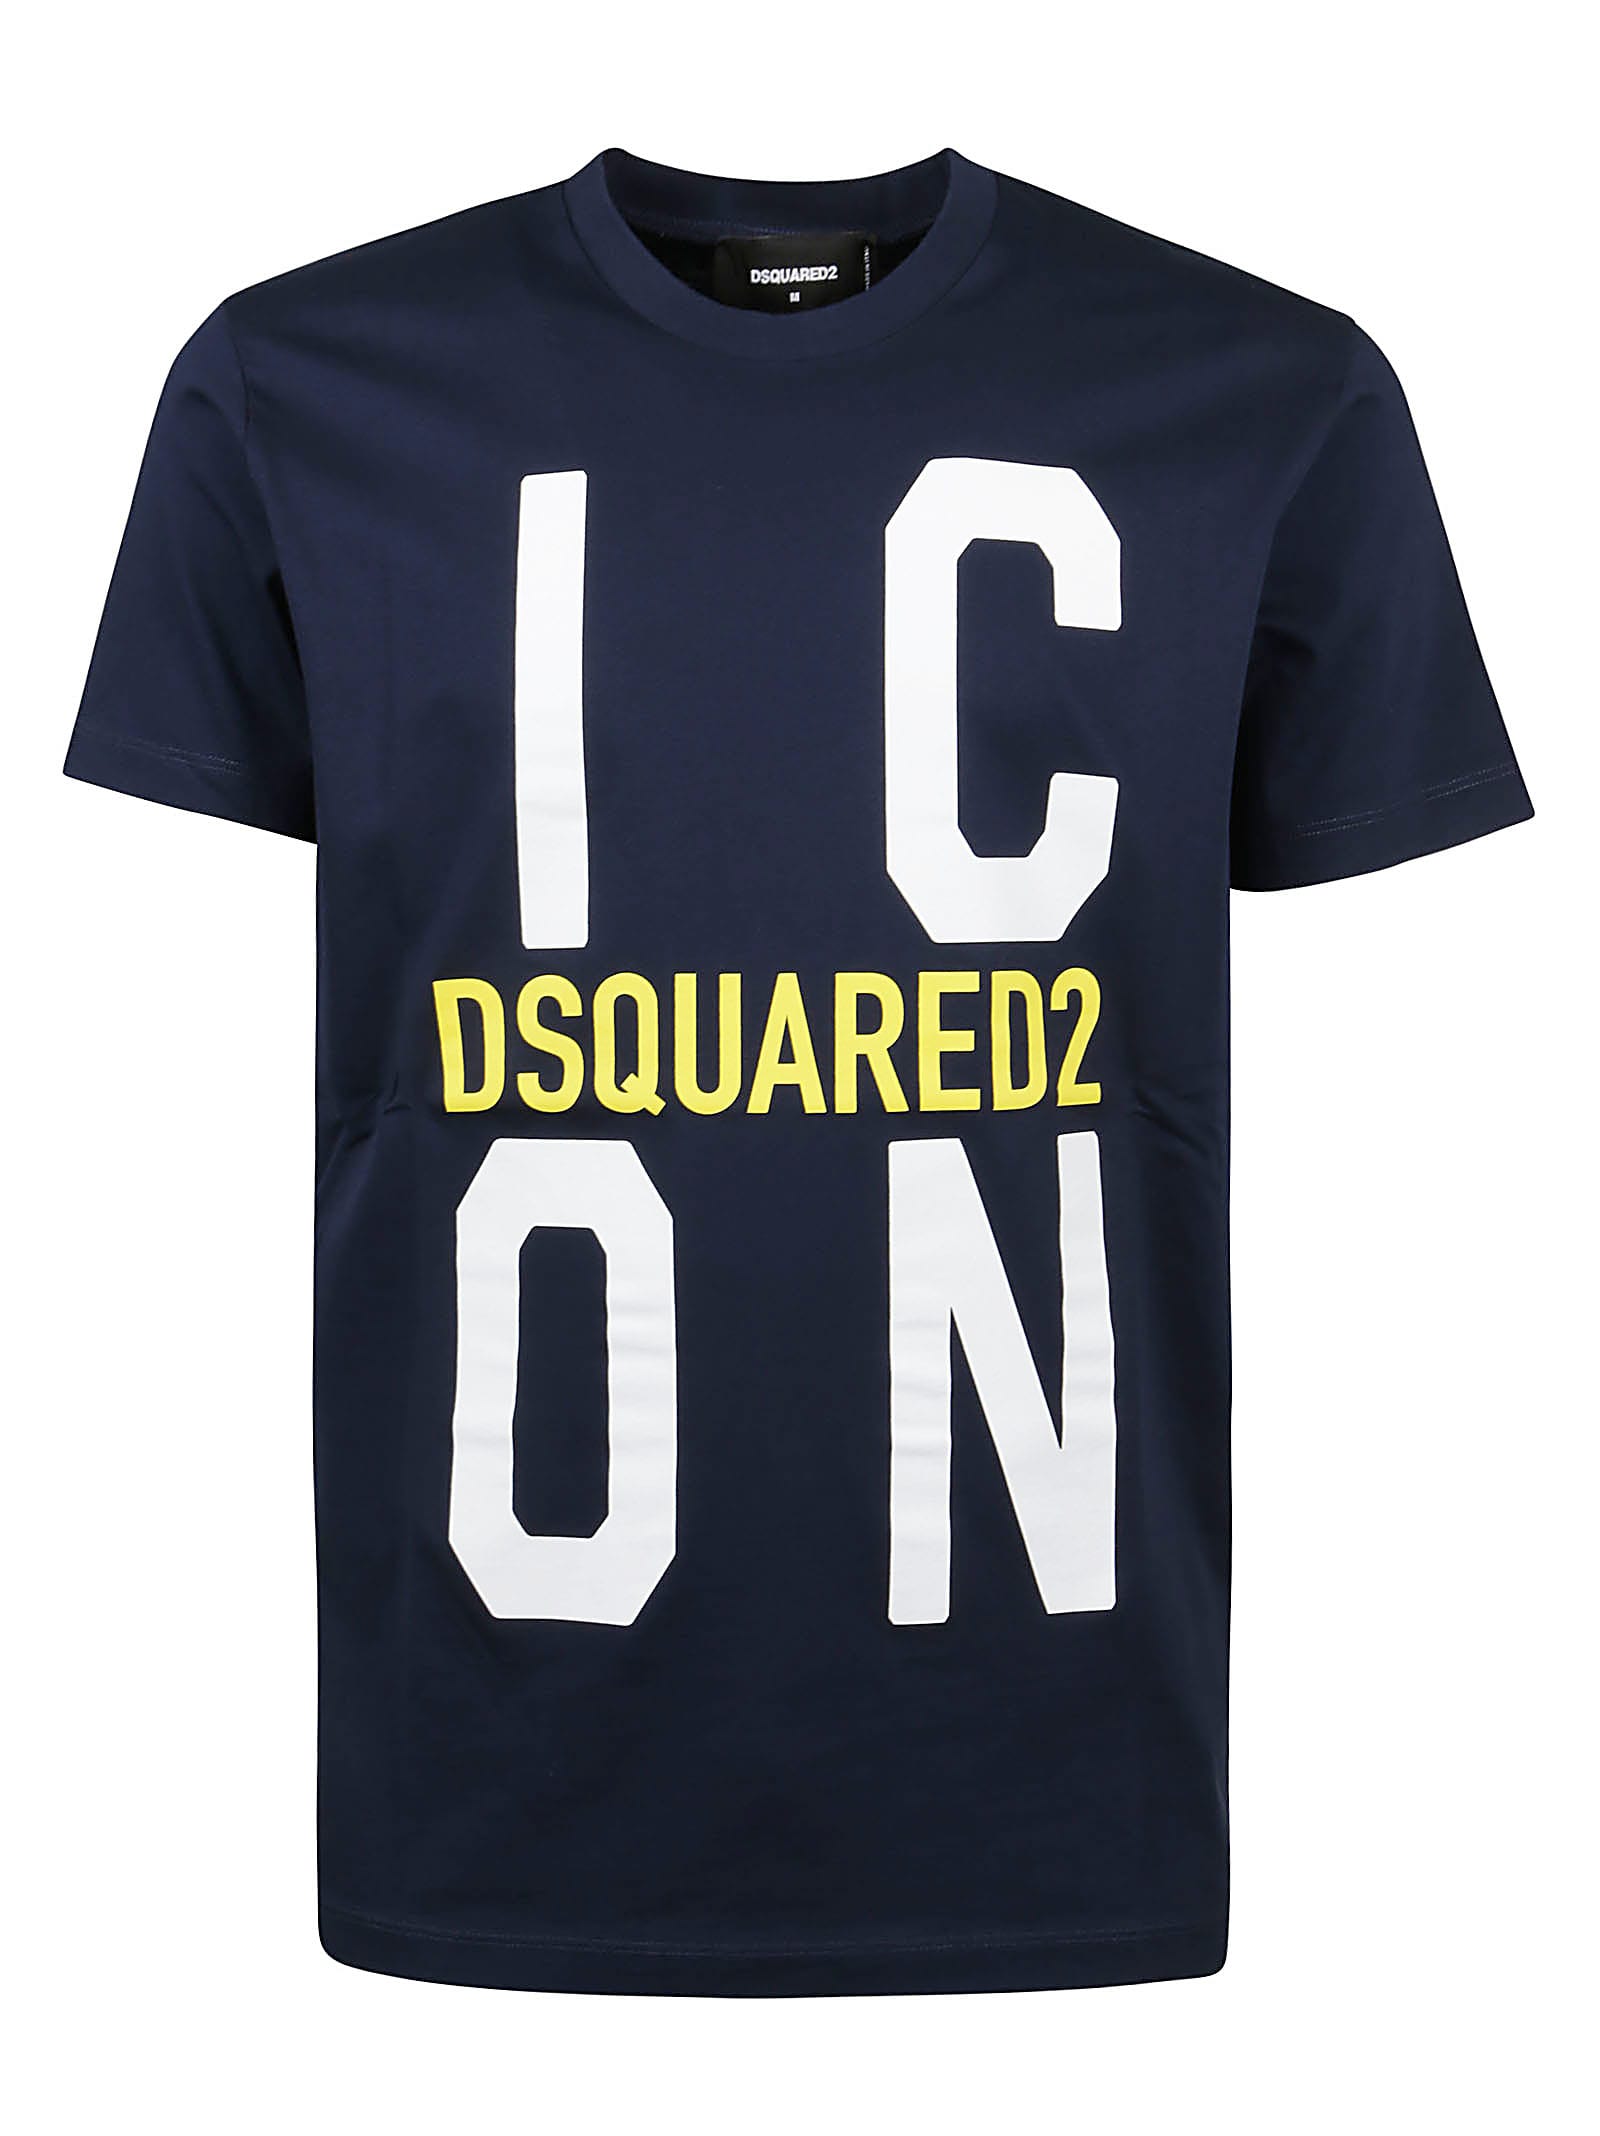 Dsquared2 T-shirt In Navy Blue